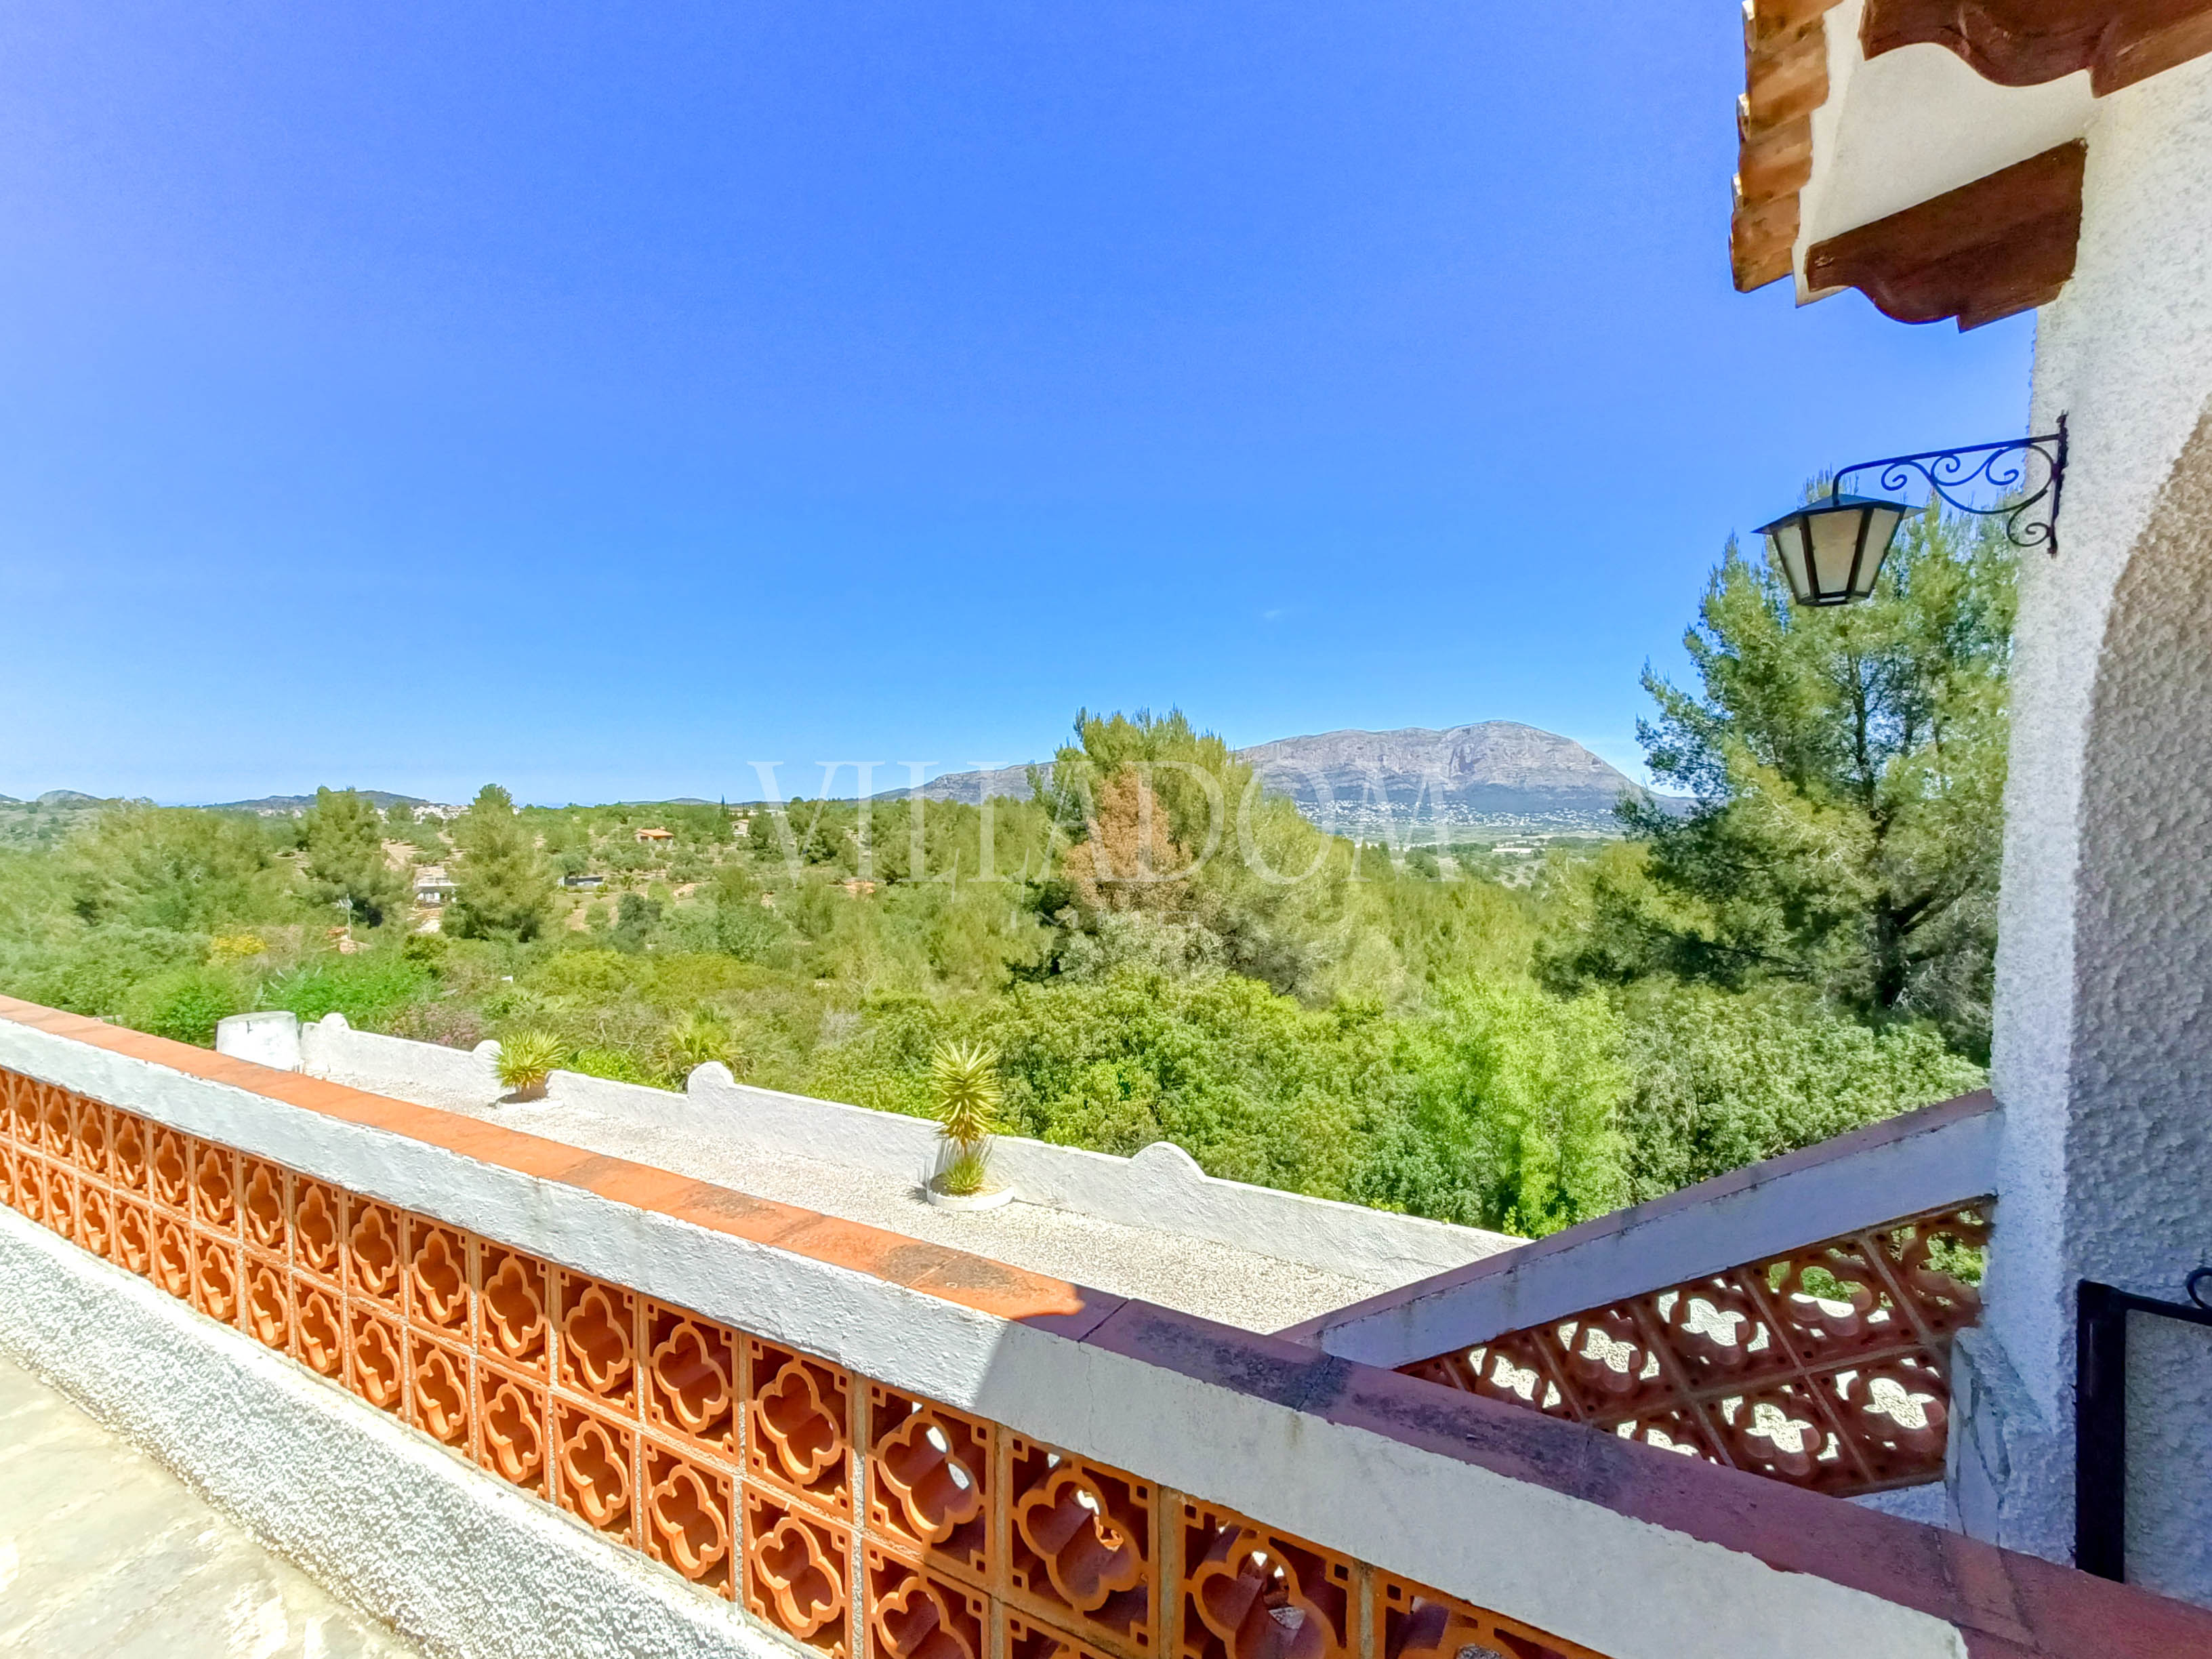 Country house surrounded by nature in Gata de Gorgos